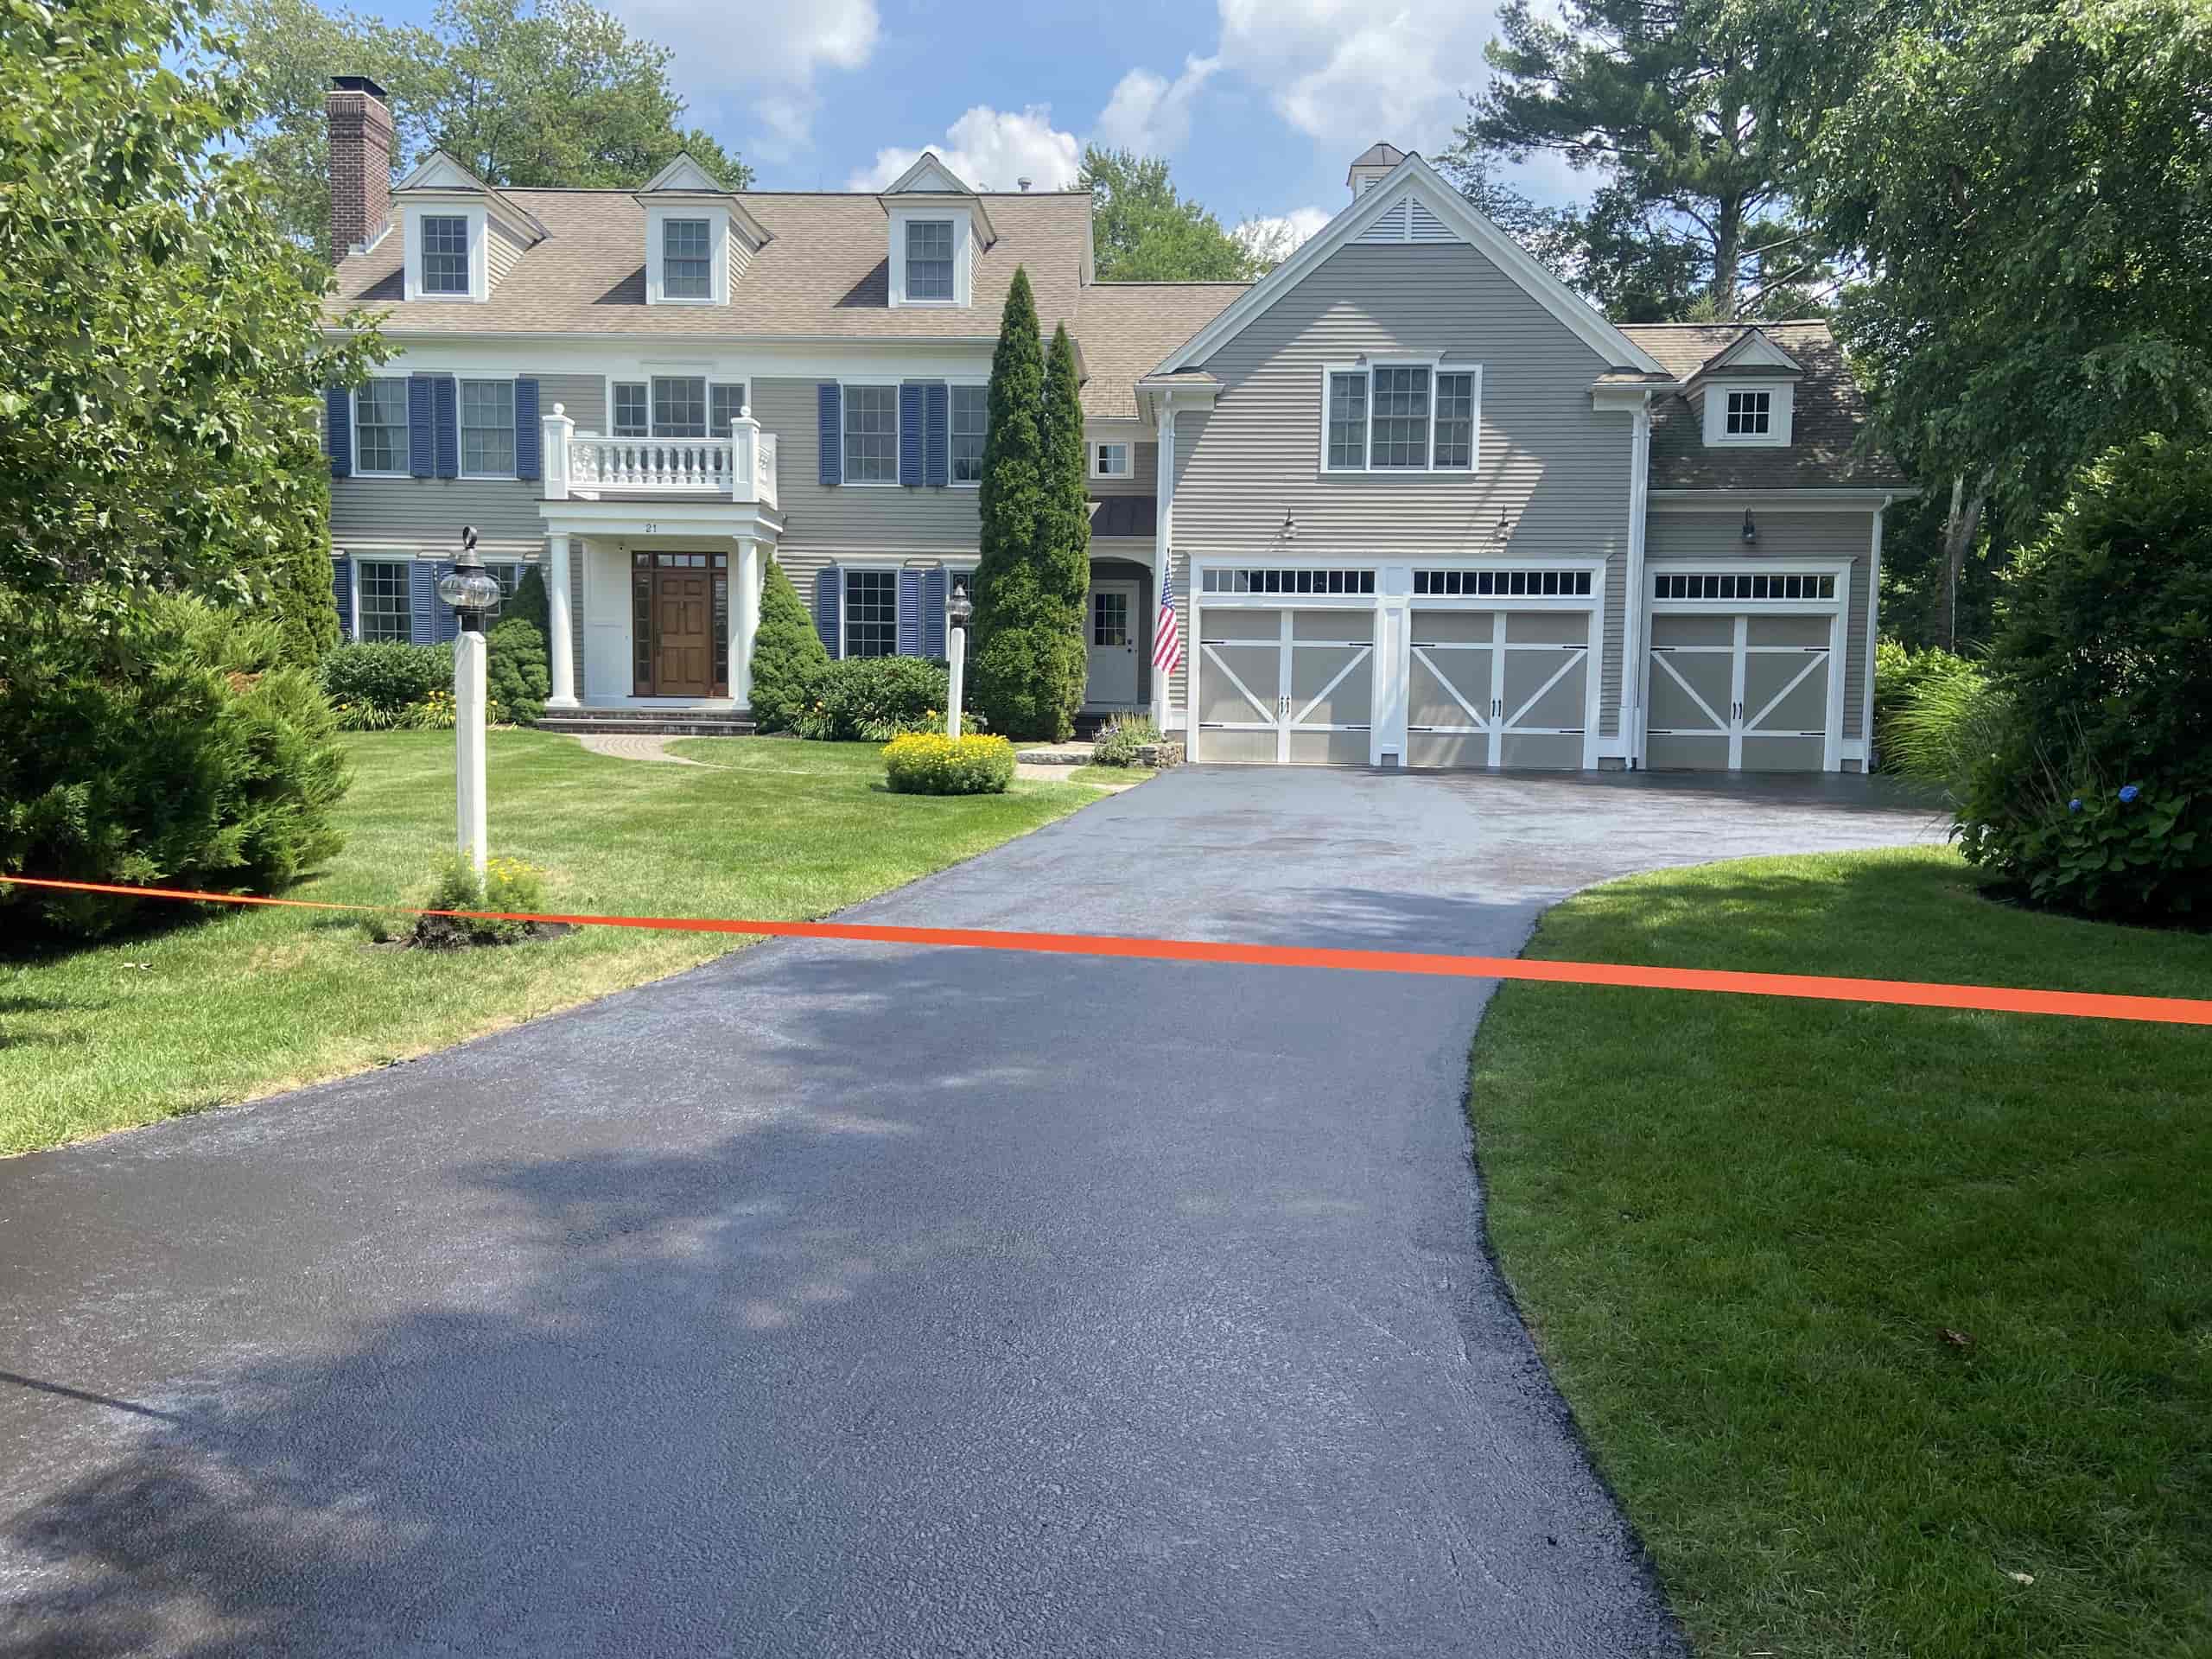 8 Reasons to Sealcoat Your Driveway